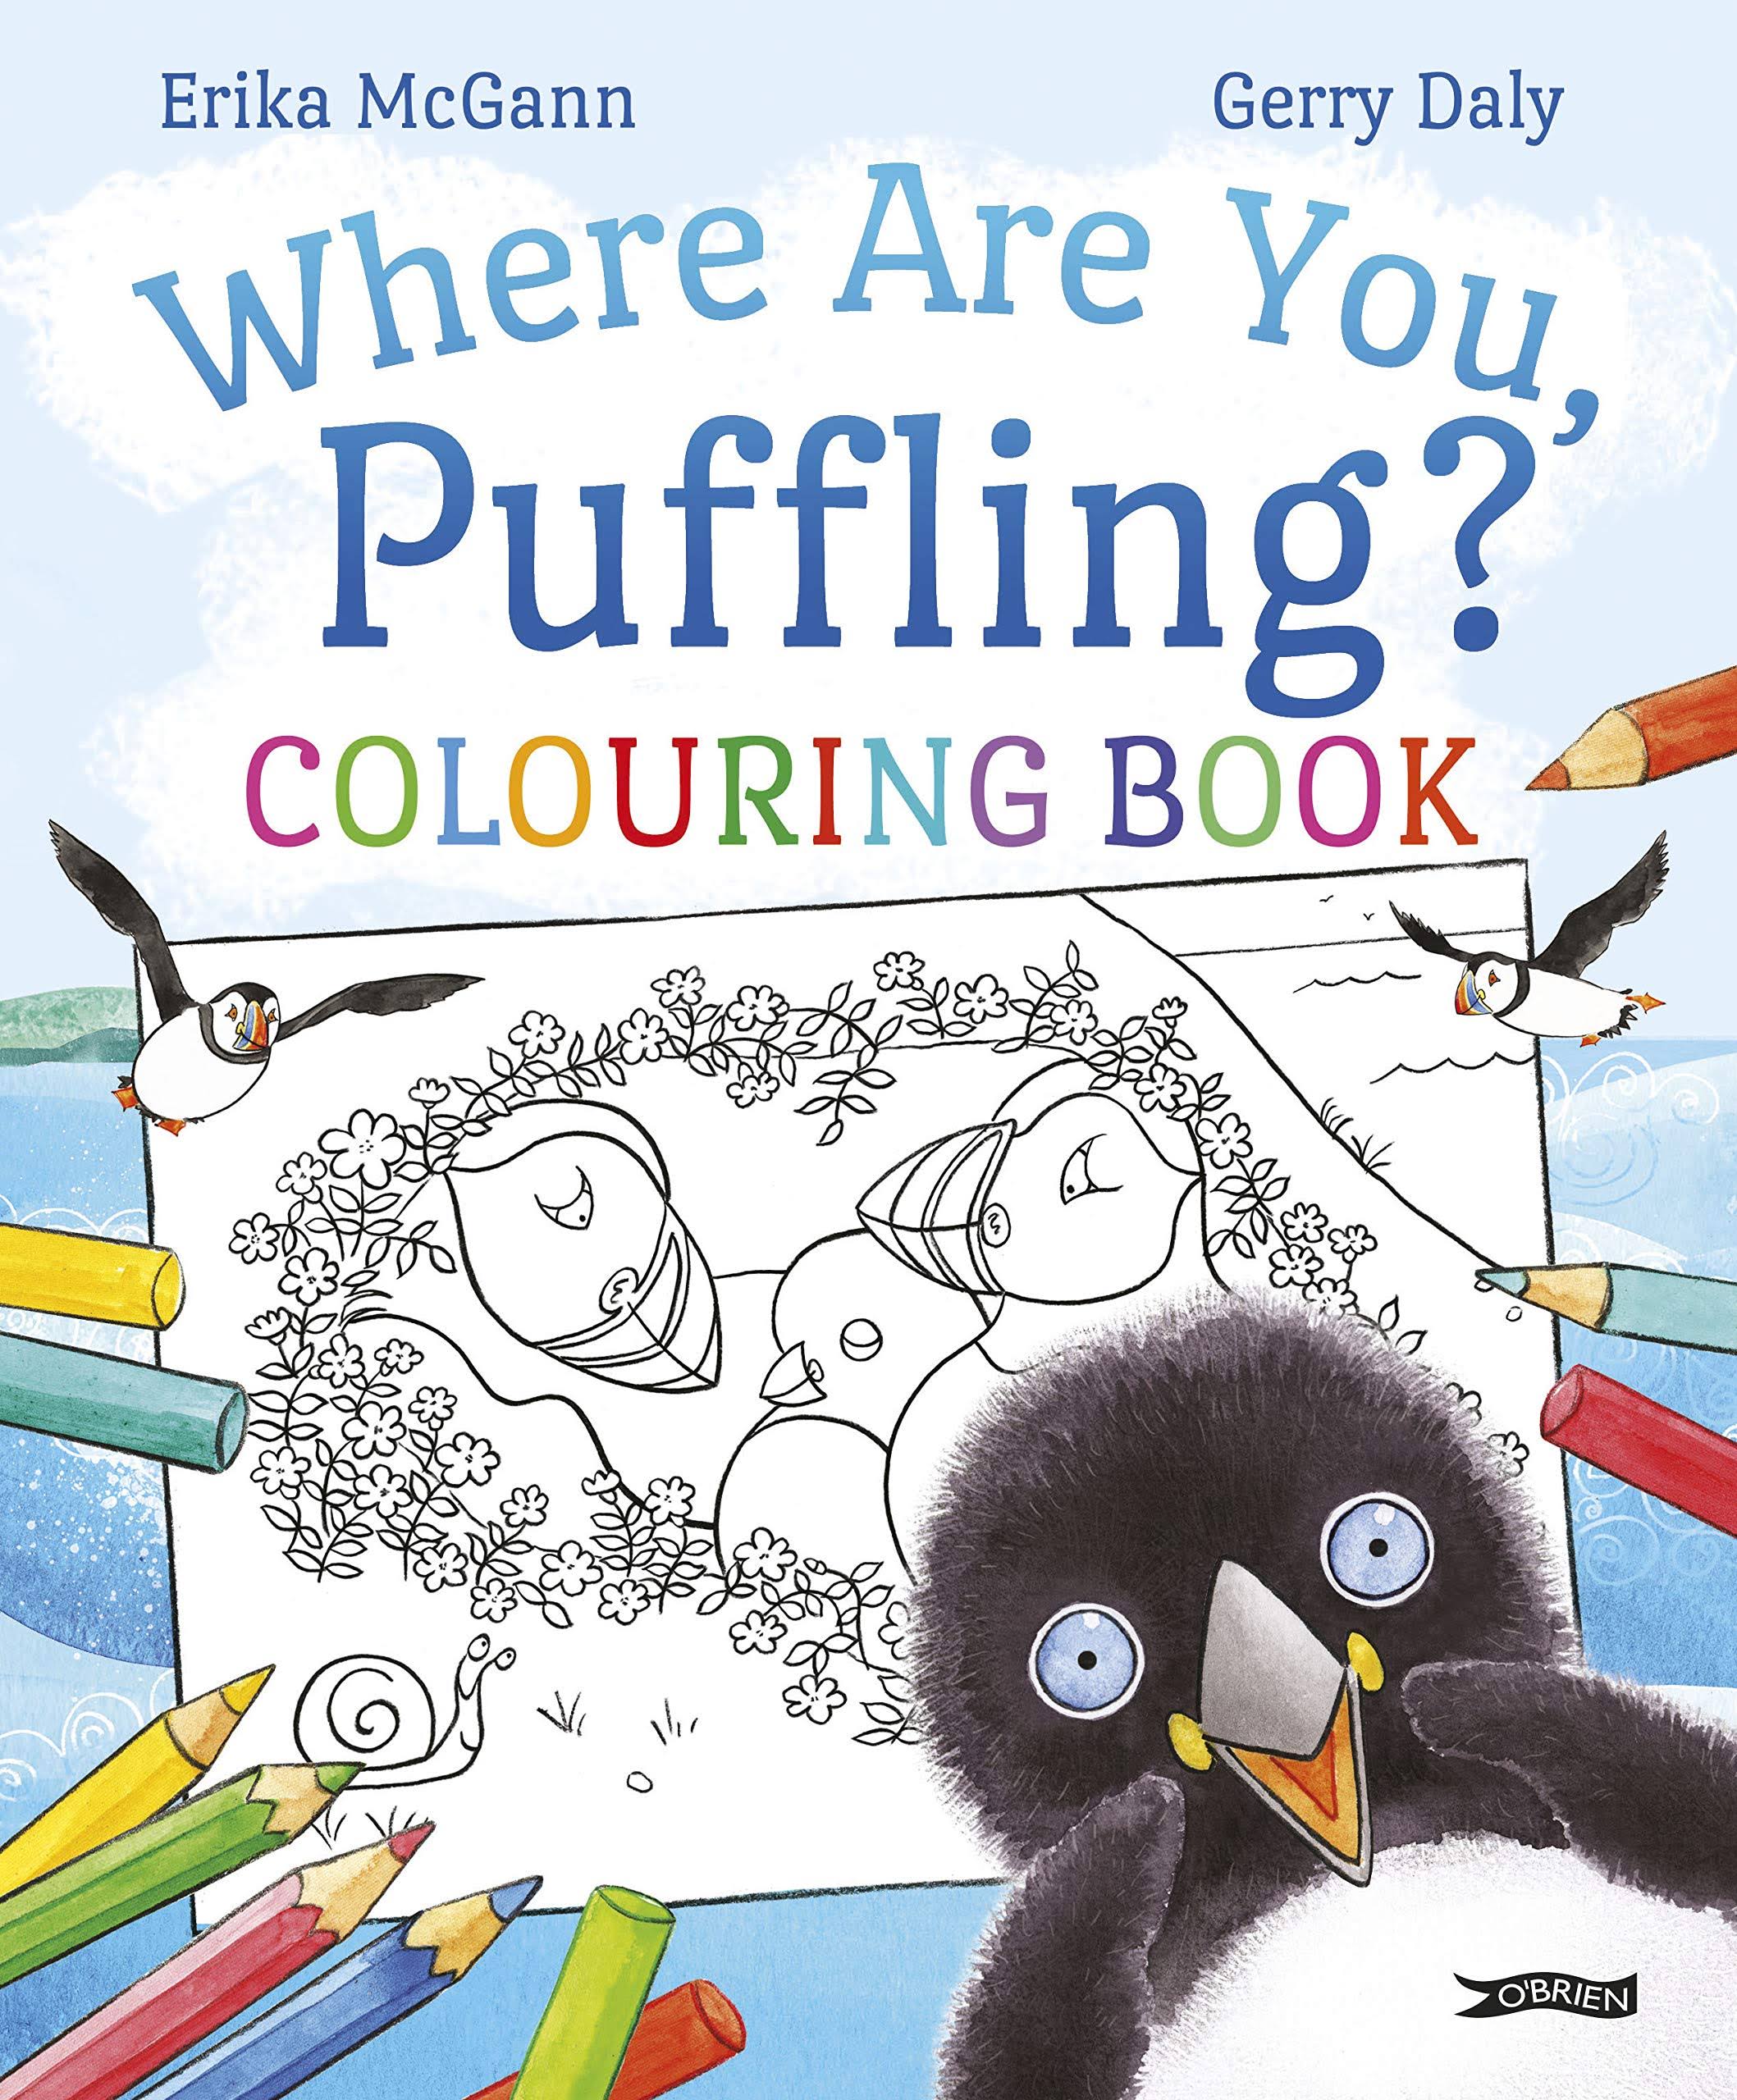 Where Are You, Puffling? Colouring Book [Book]